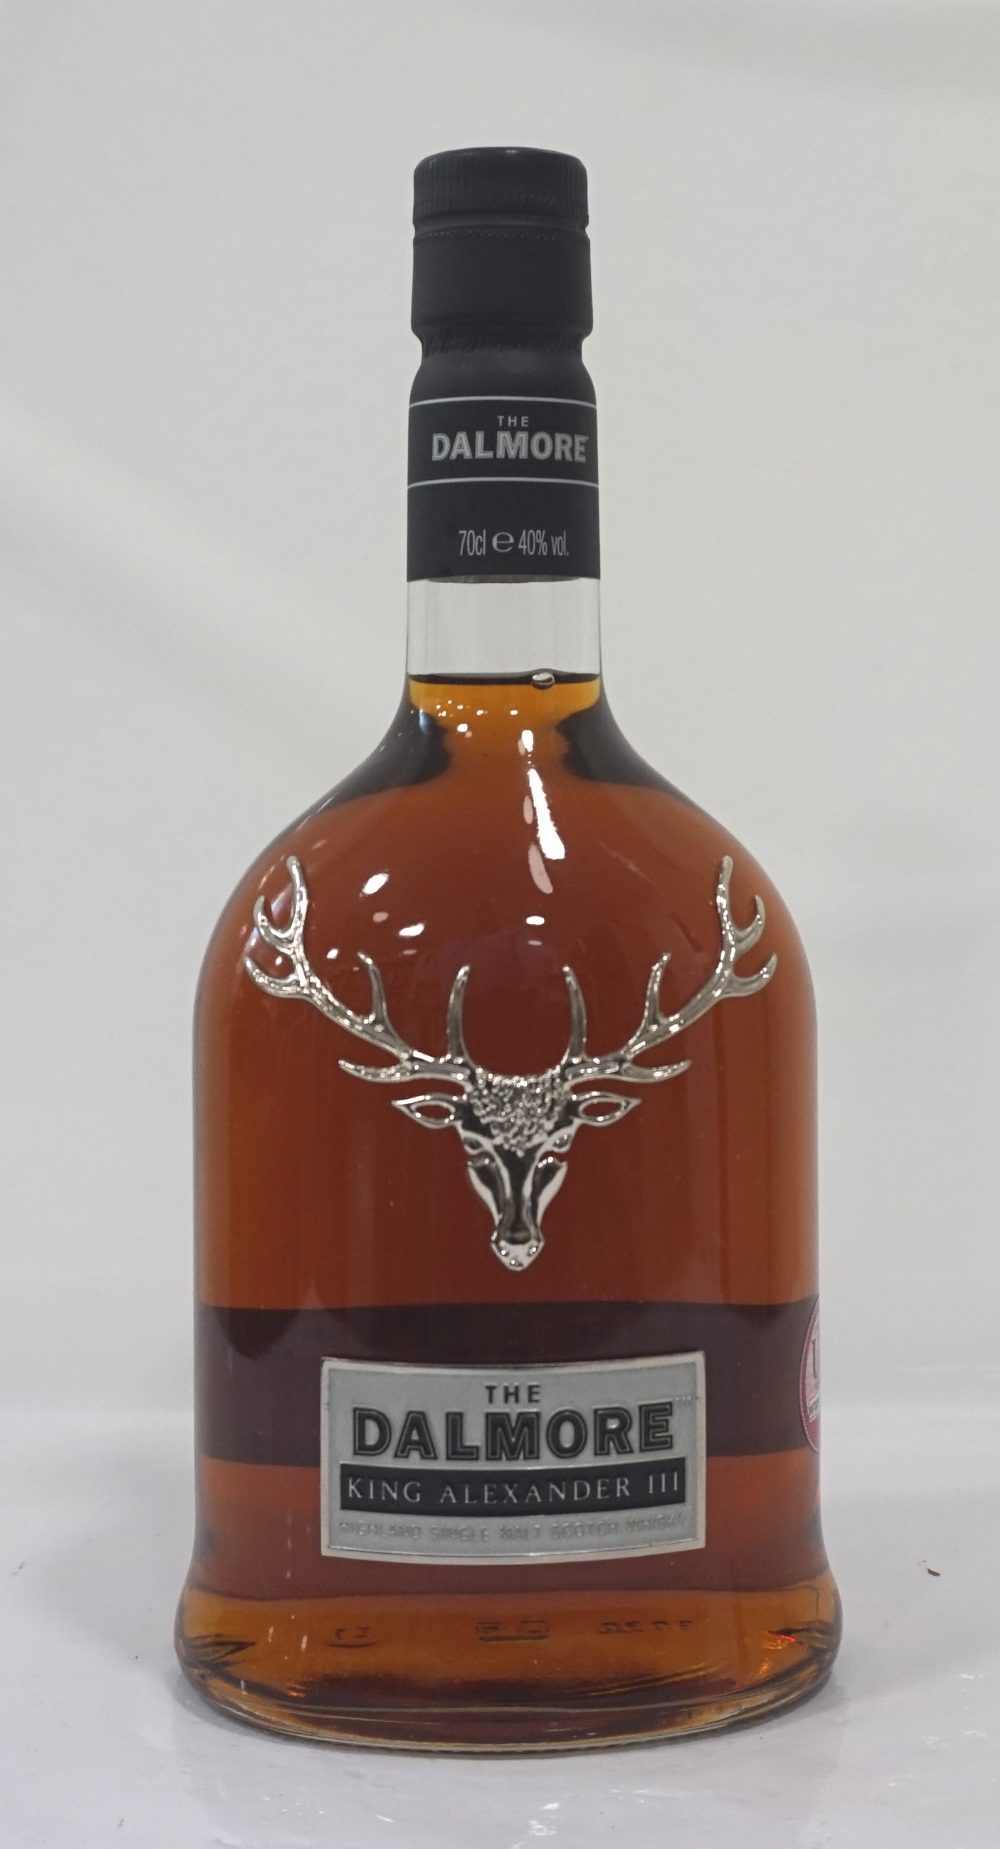 DALMORE KING ALEXANDER III A bottle of the Dalmore King Alexander III Single Malt Scotch Whisky.